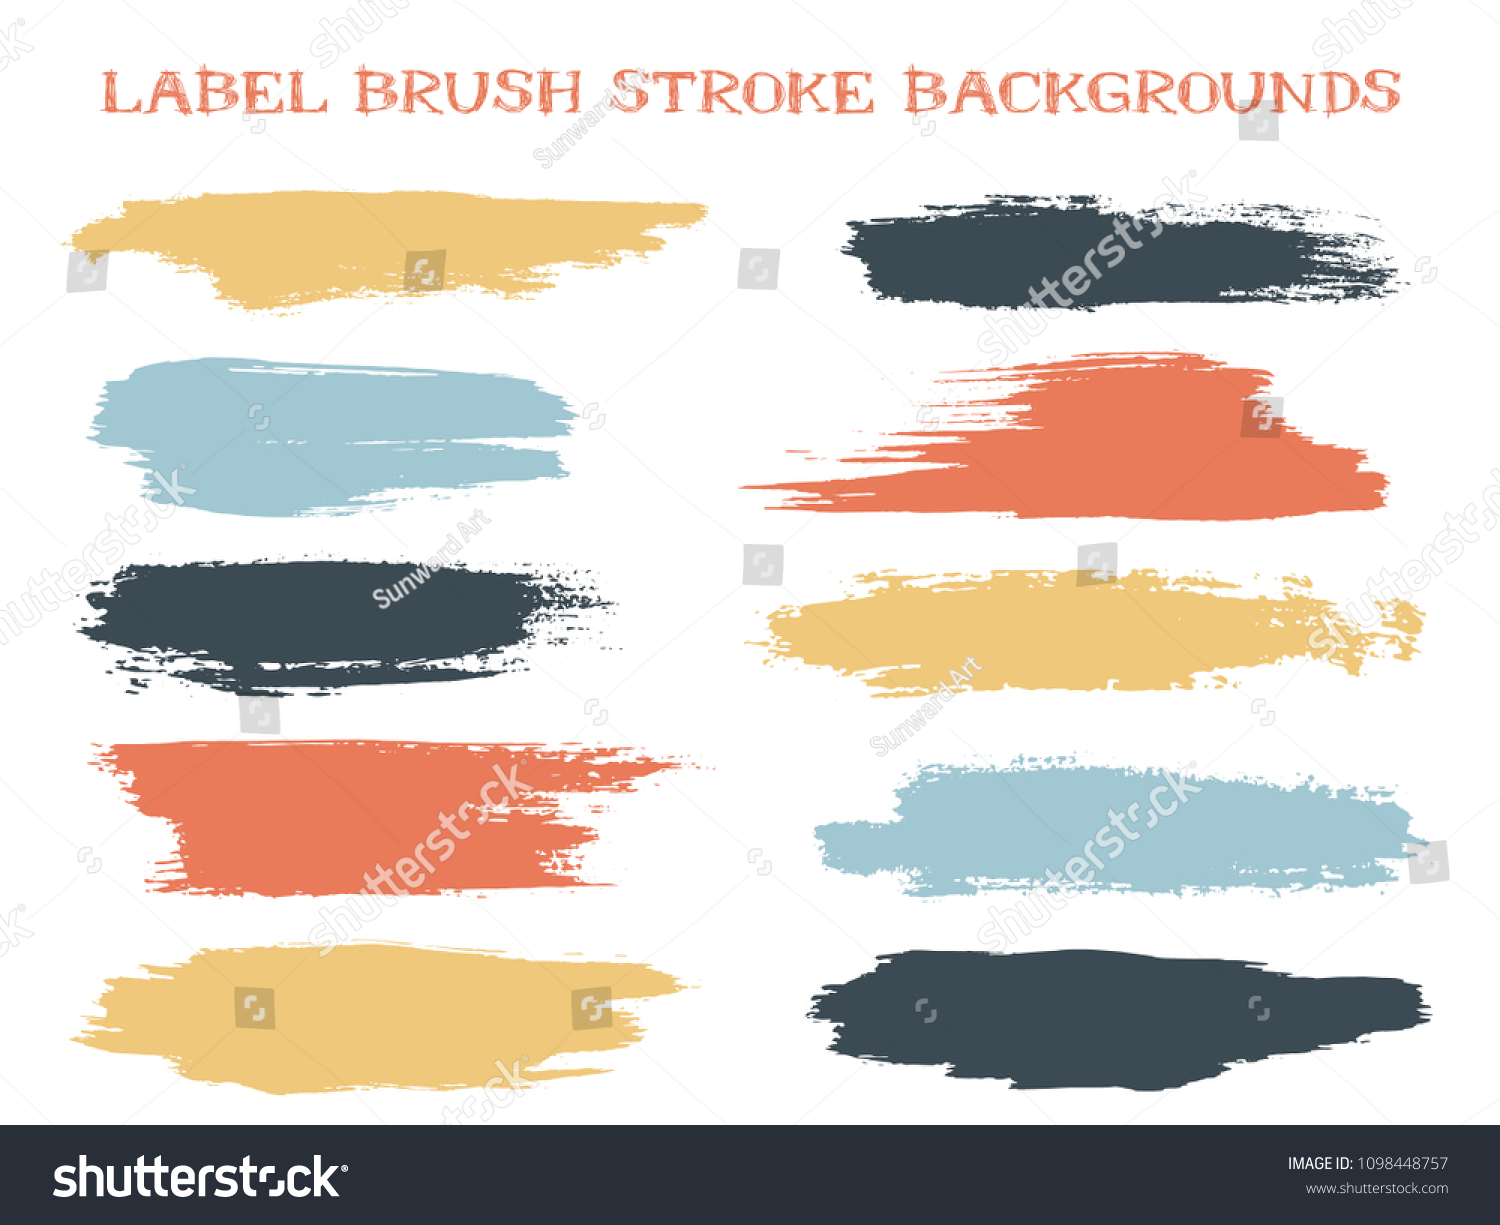 Minimal label brush stroke backgrounds, paint or ink smudges vector for tags and stamps design. Painted label backgrounds patch. Interior colors scheme swatches. Ink dabs, red blue black splashes. #1098448757